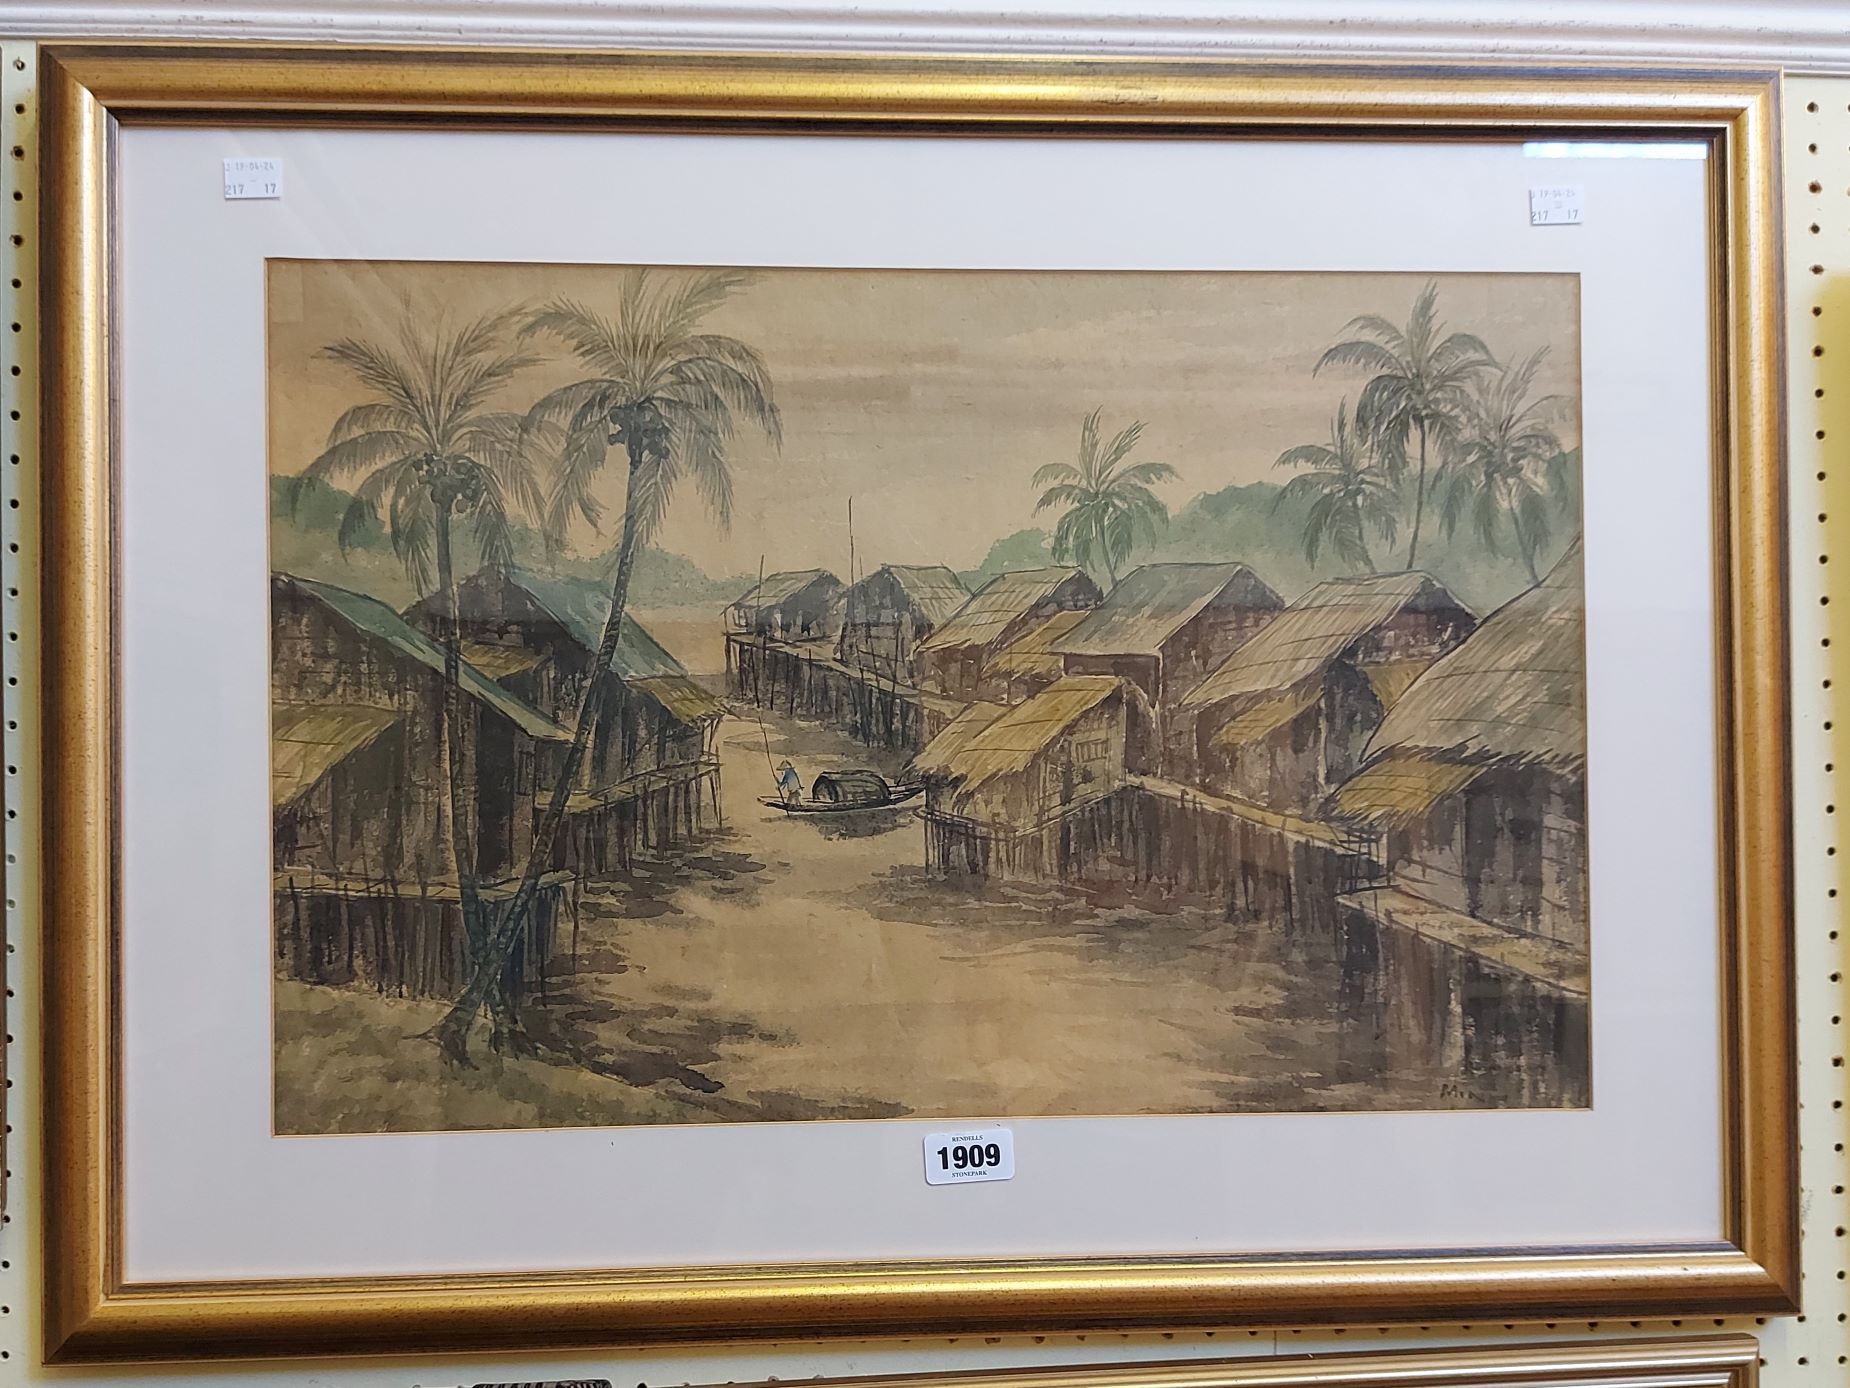 Minh: a gilt framed watercolour, depicting a view of Balinese buildings and river - signed